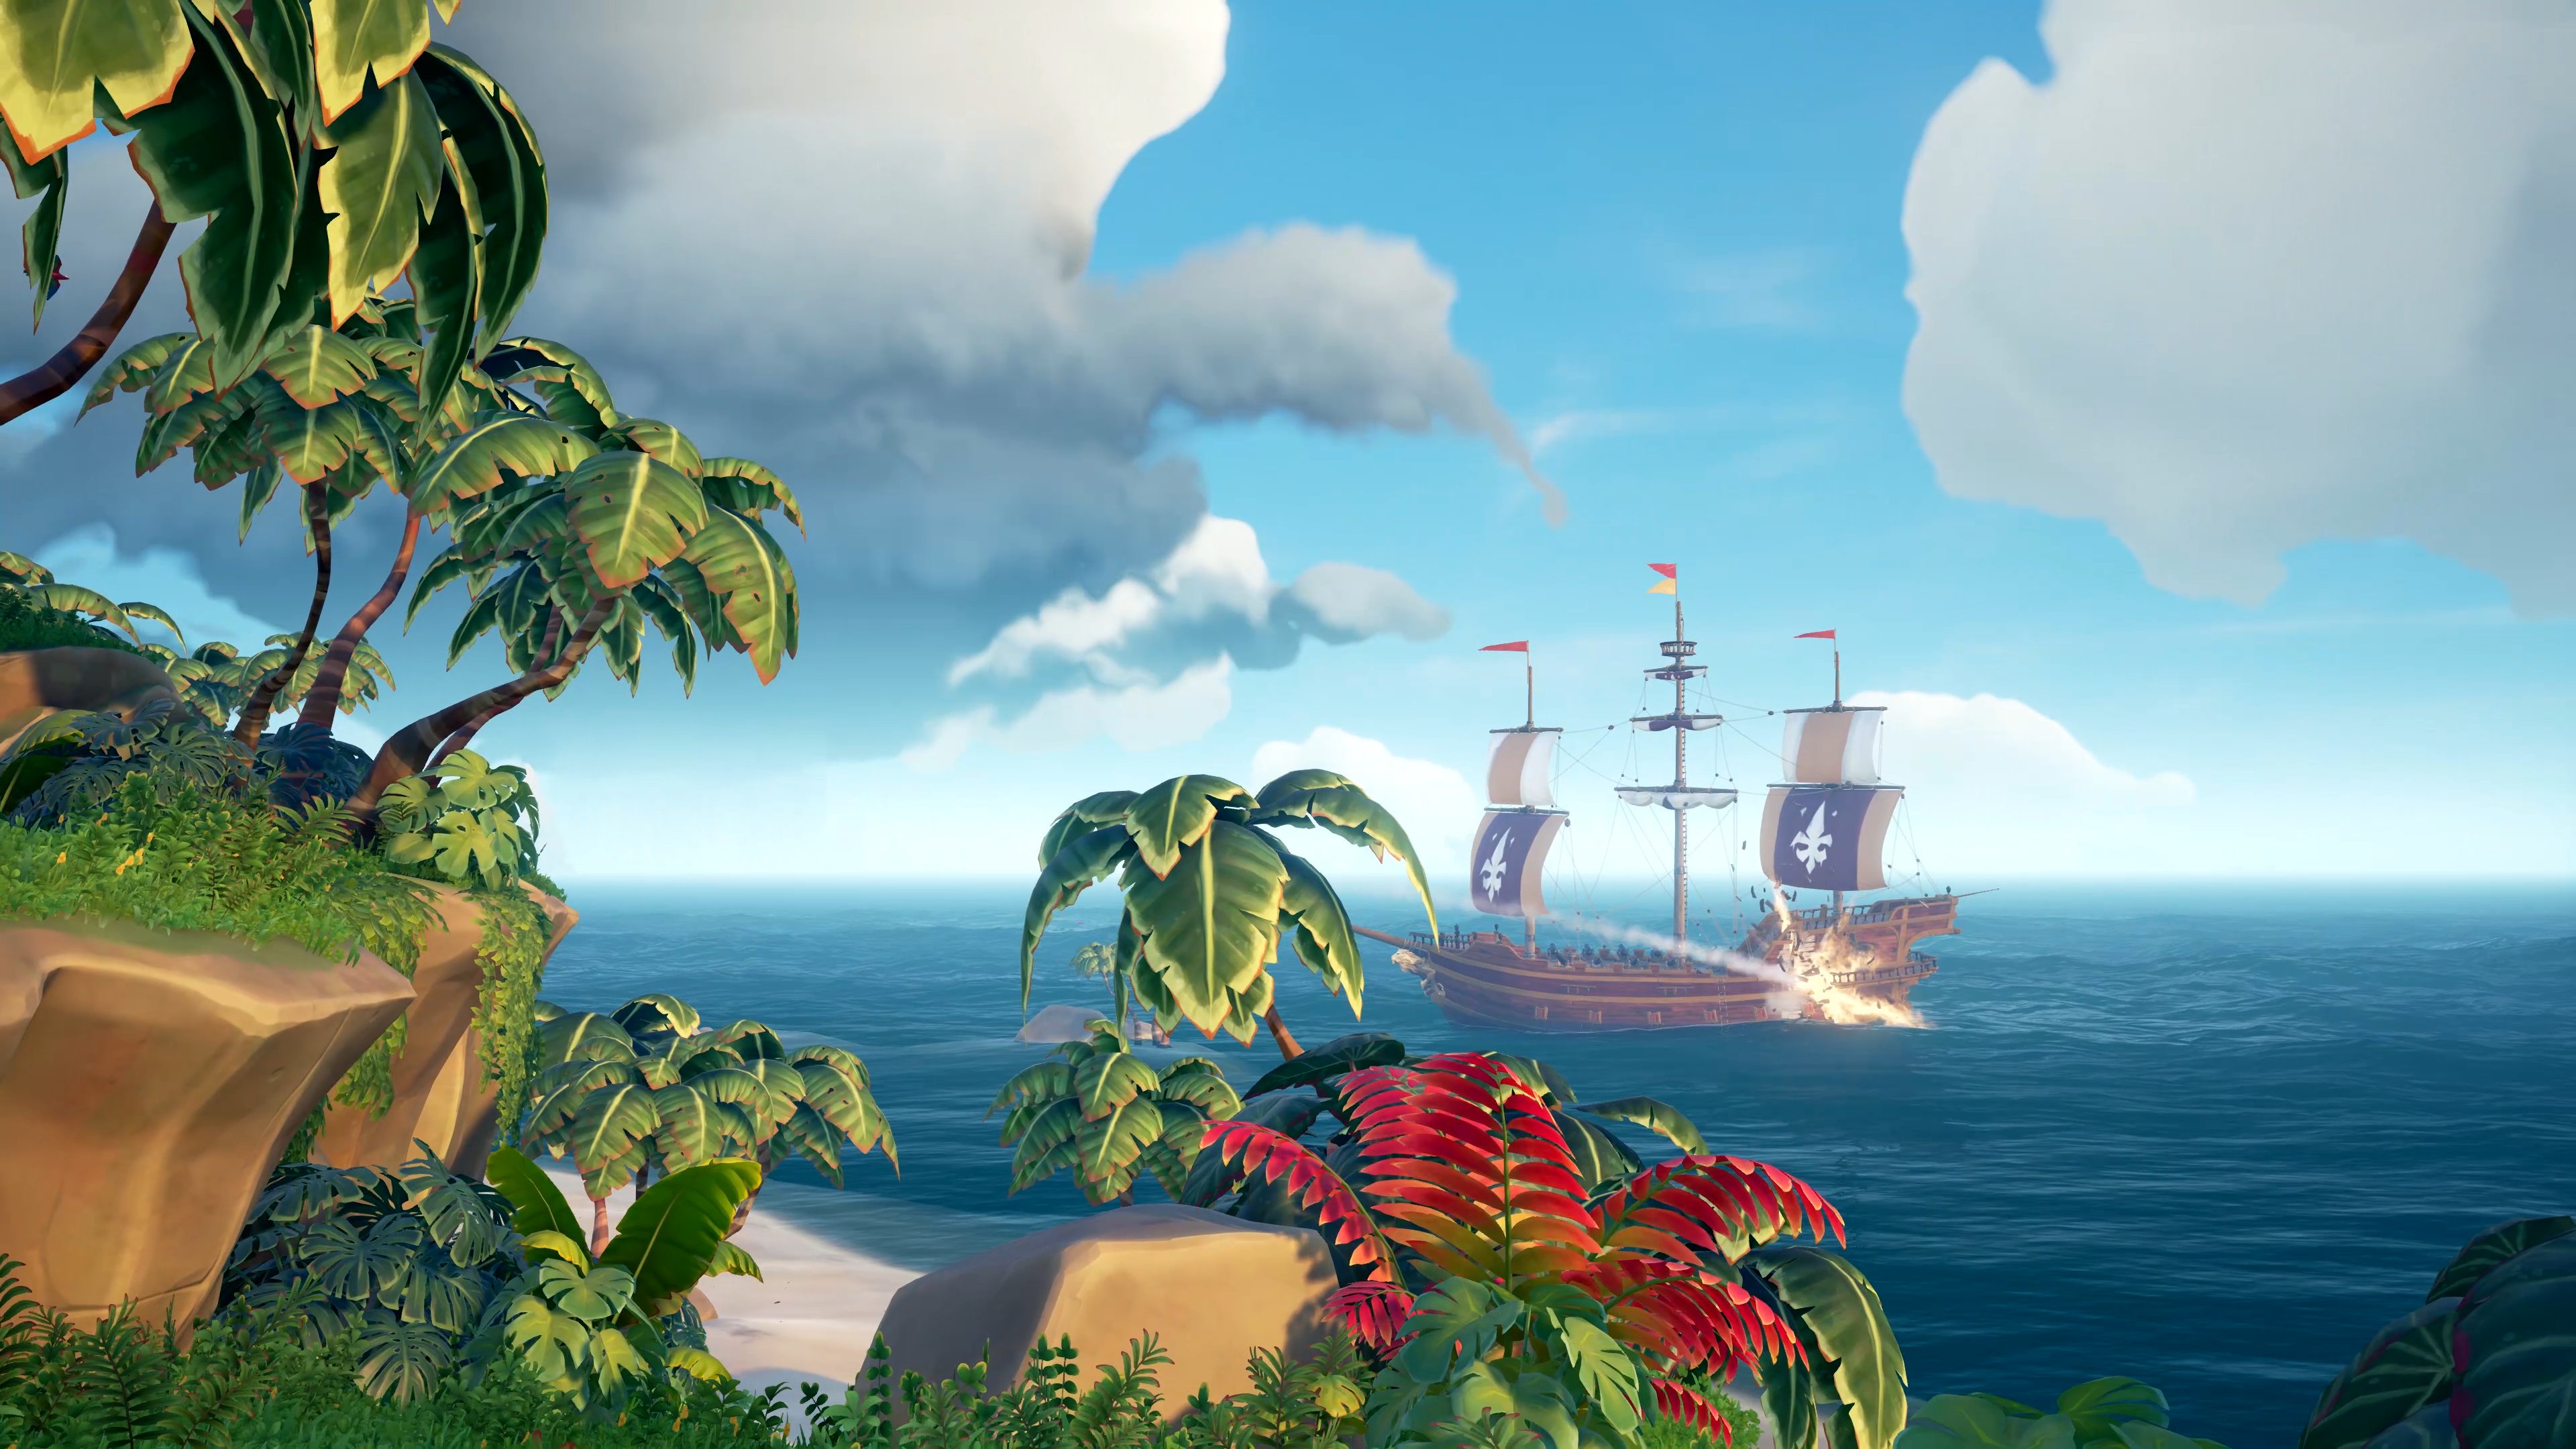 Sea of Thieves is your childhood pirate fantasy come to ... - 3840 x 2160 jpeg 845kB